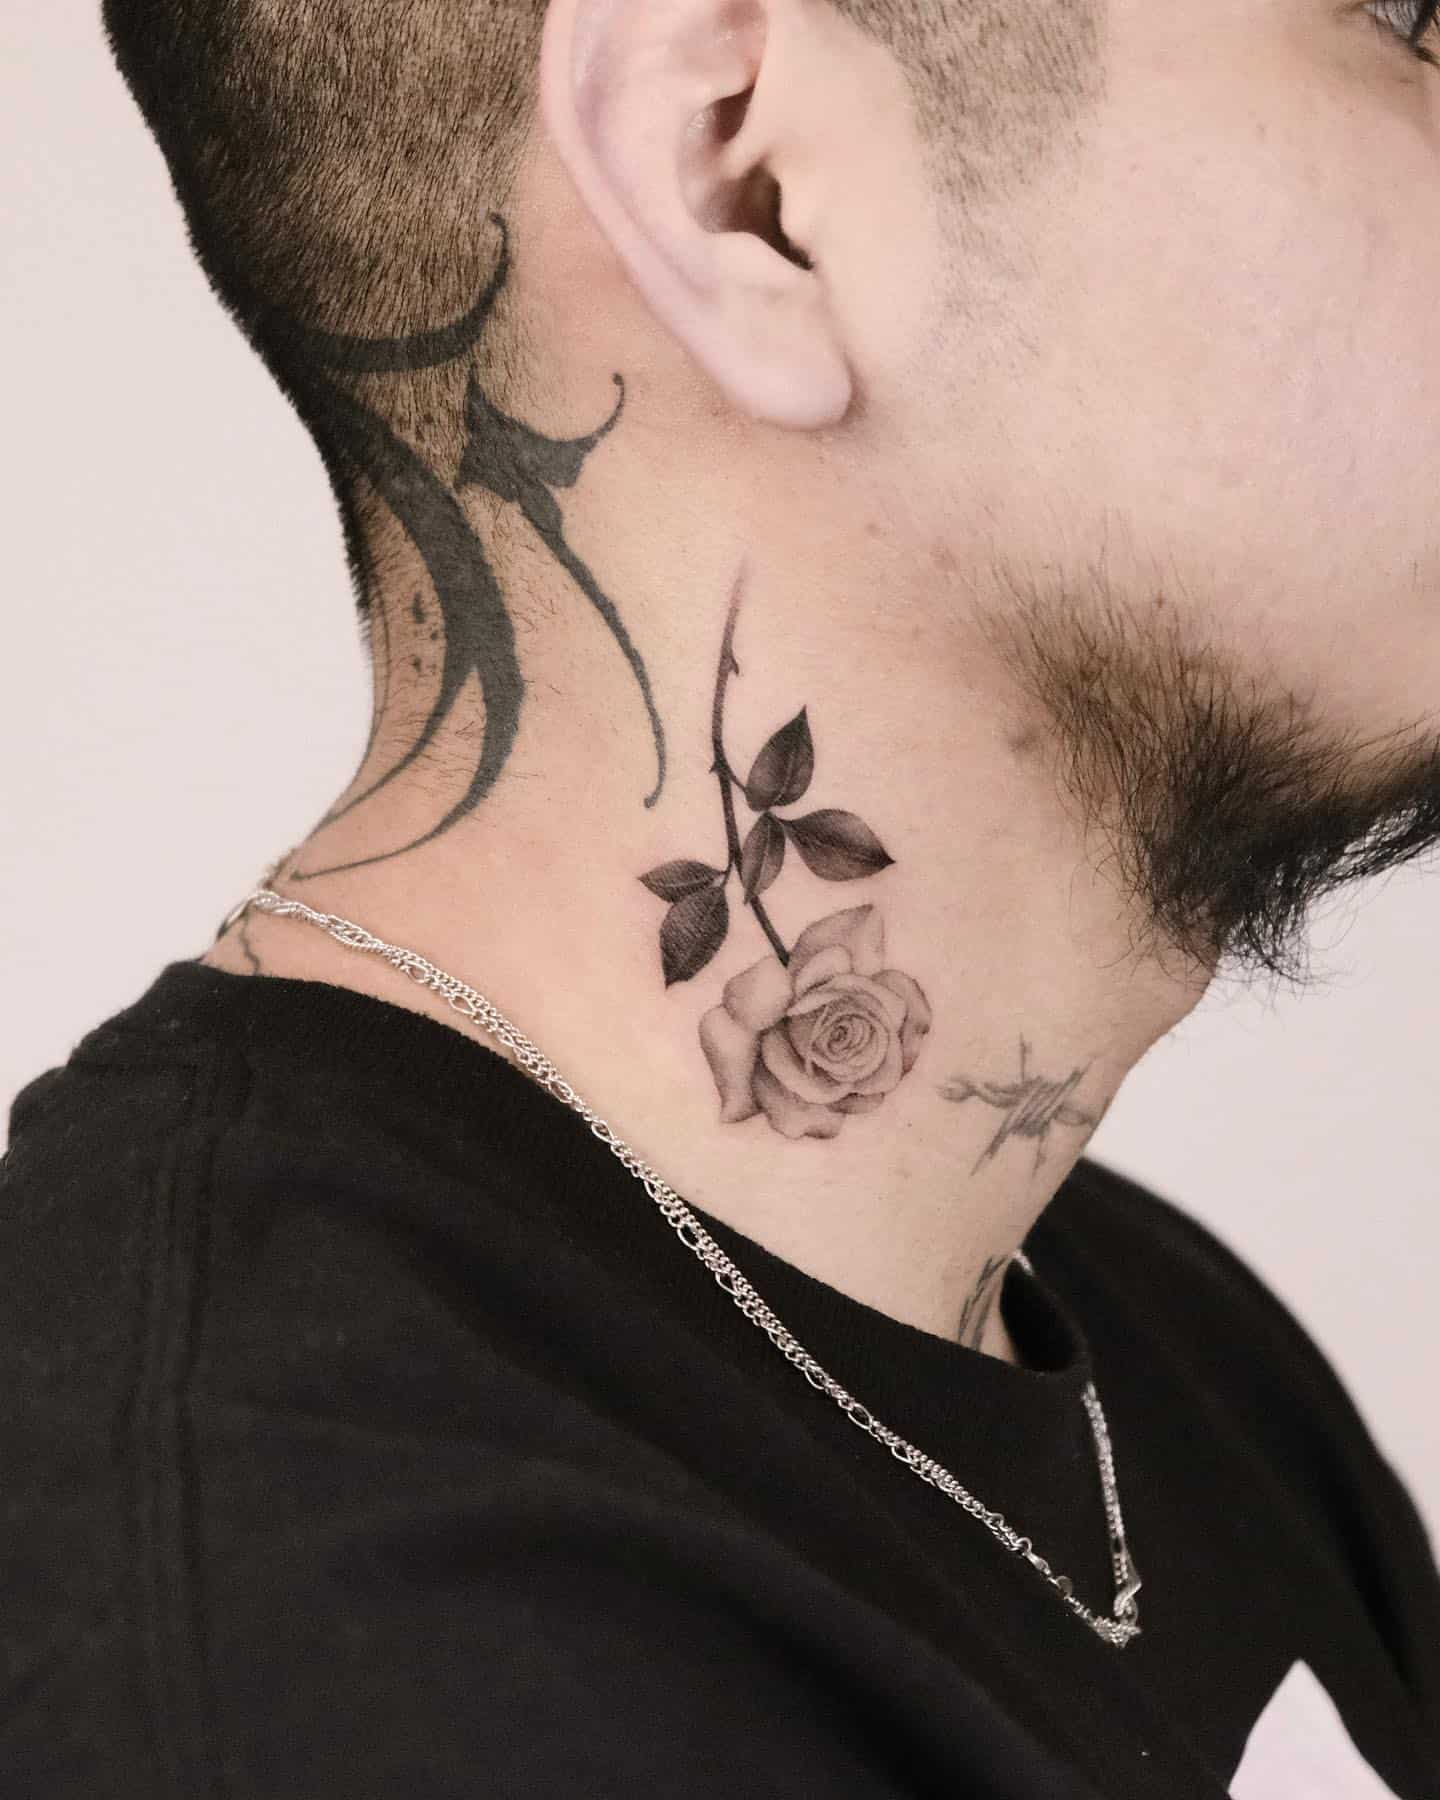 𝓑𝓵𝓮𝓼𝓼𝓮𝓭  Tattoos for guys Side neck tattoo Tattoos  Neck tattoo  for guys Side neck tattoo Tattoos for guys